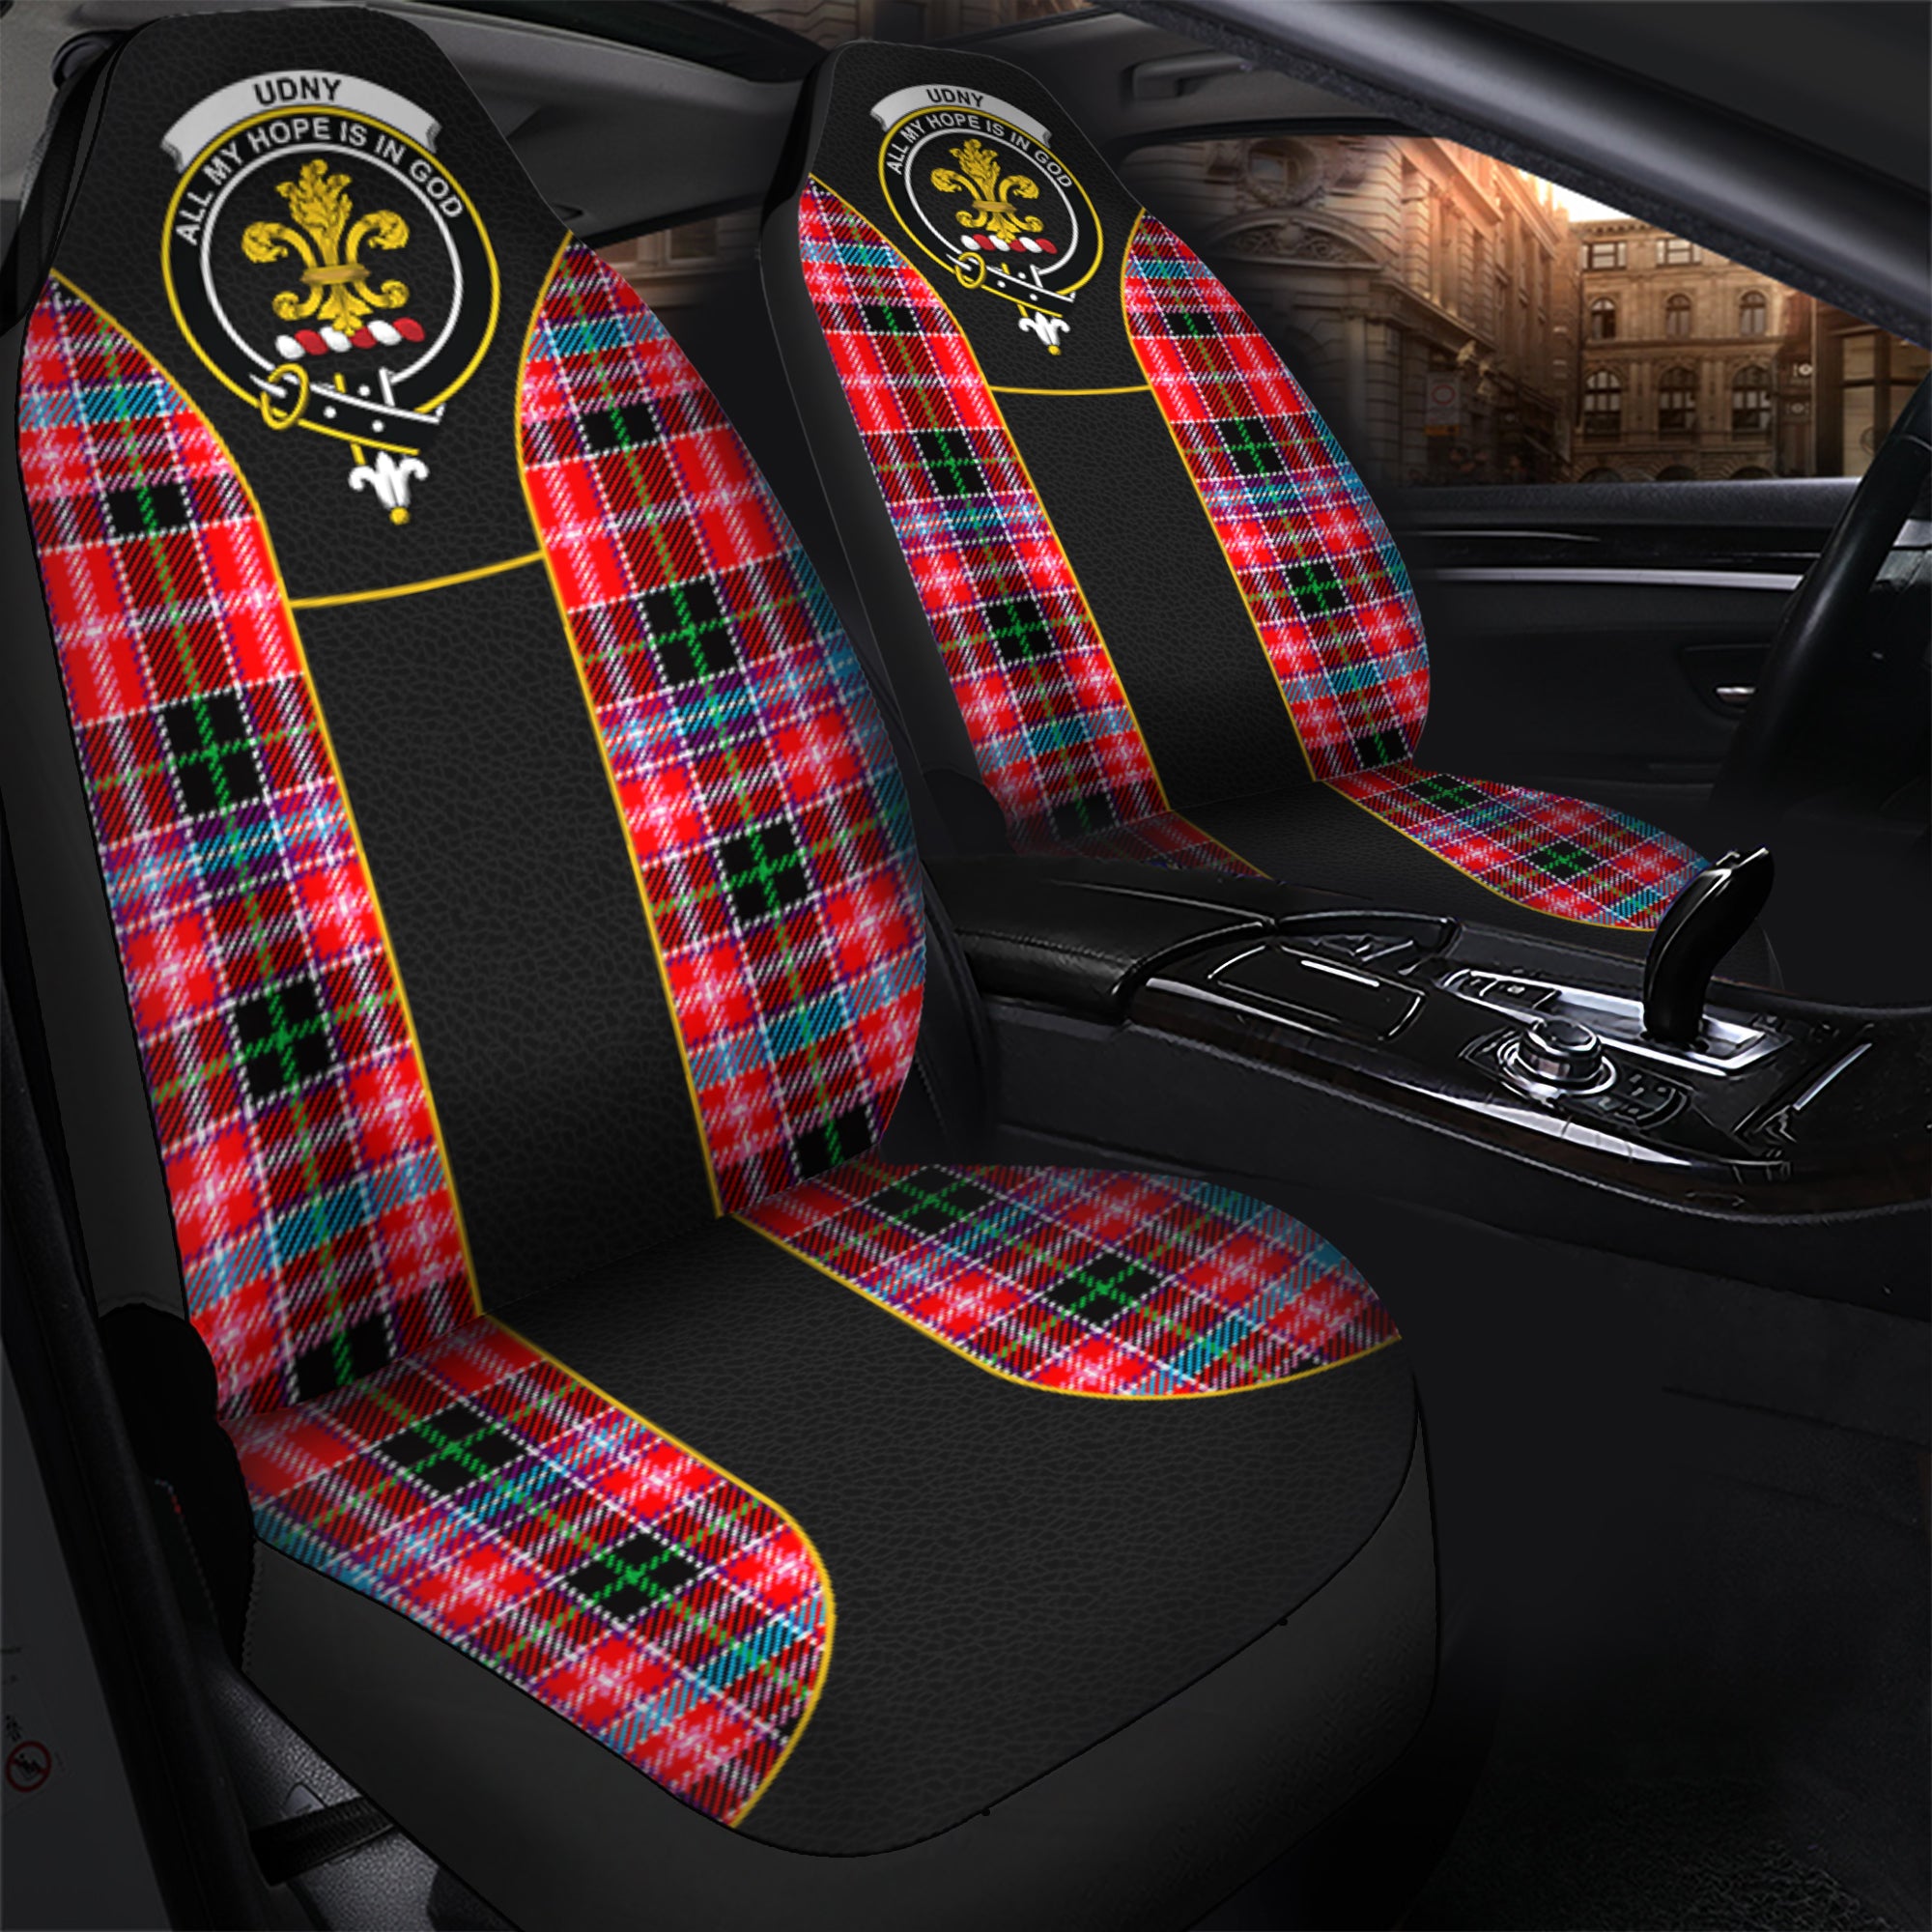 scottish-udny-tartan-crest-car-seat-cover-special-style